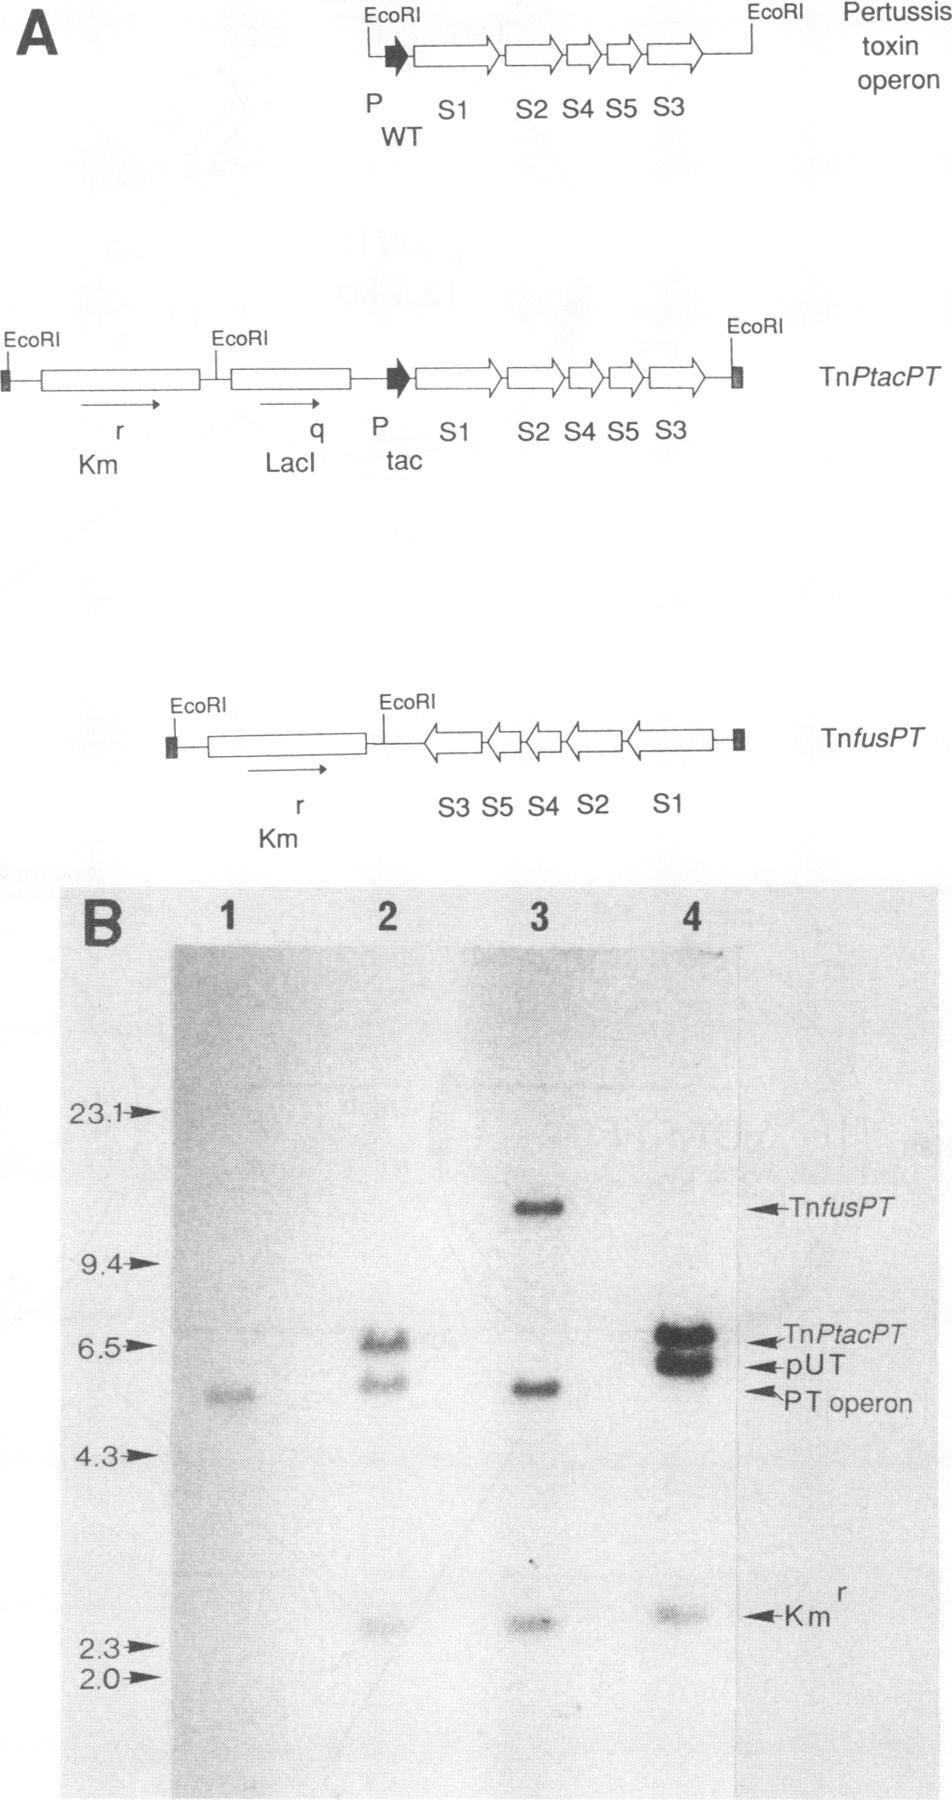 bronchiseptica ATCC 10580. Whole-cell extracts of bacteria lacking TnPtacPTI and TnfusPTI (lane 1) or containing TnPtacPTi (lane 2) or TnfusPTi (lane 3) are shown, as are extracts of B.